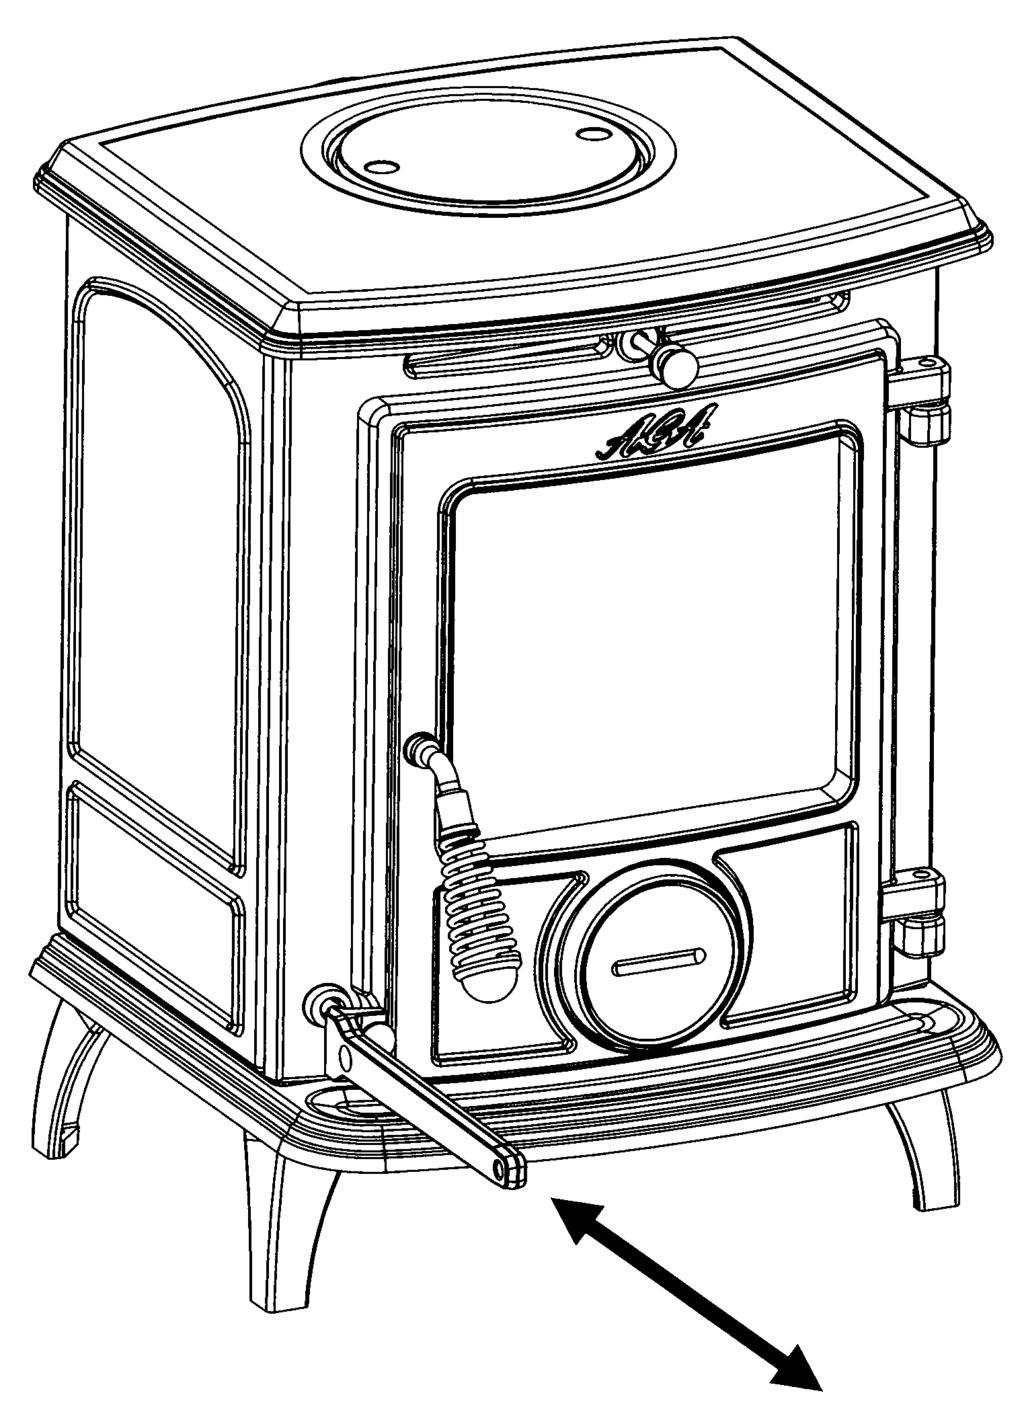 Fig.10 DISPOSAL OF ASH Ashes should be placed in a metal container with a tight fitting lid.